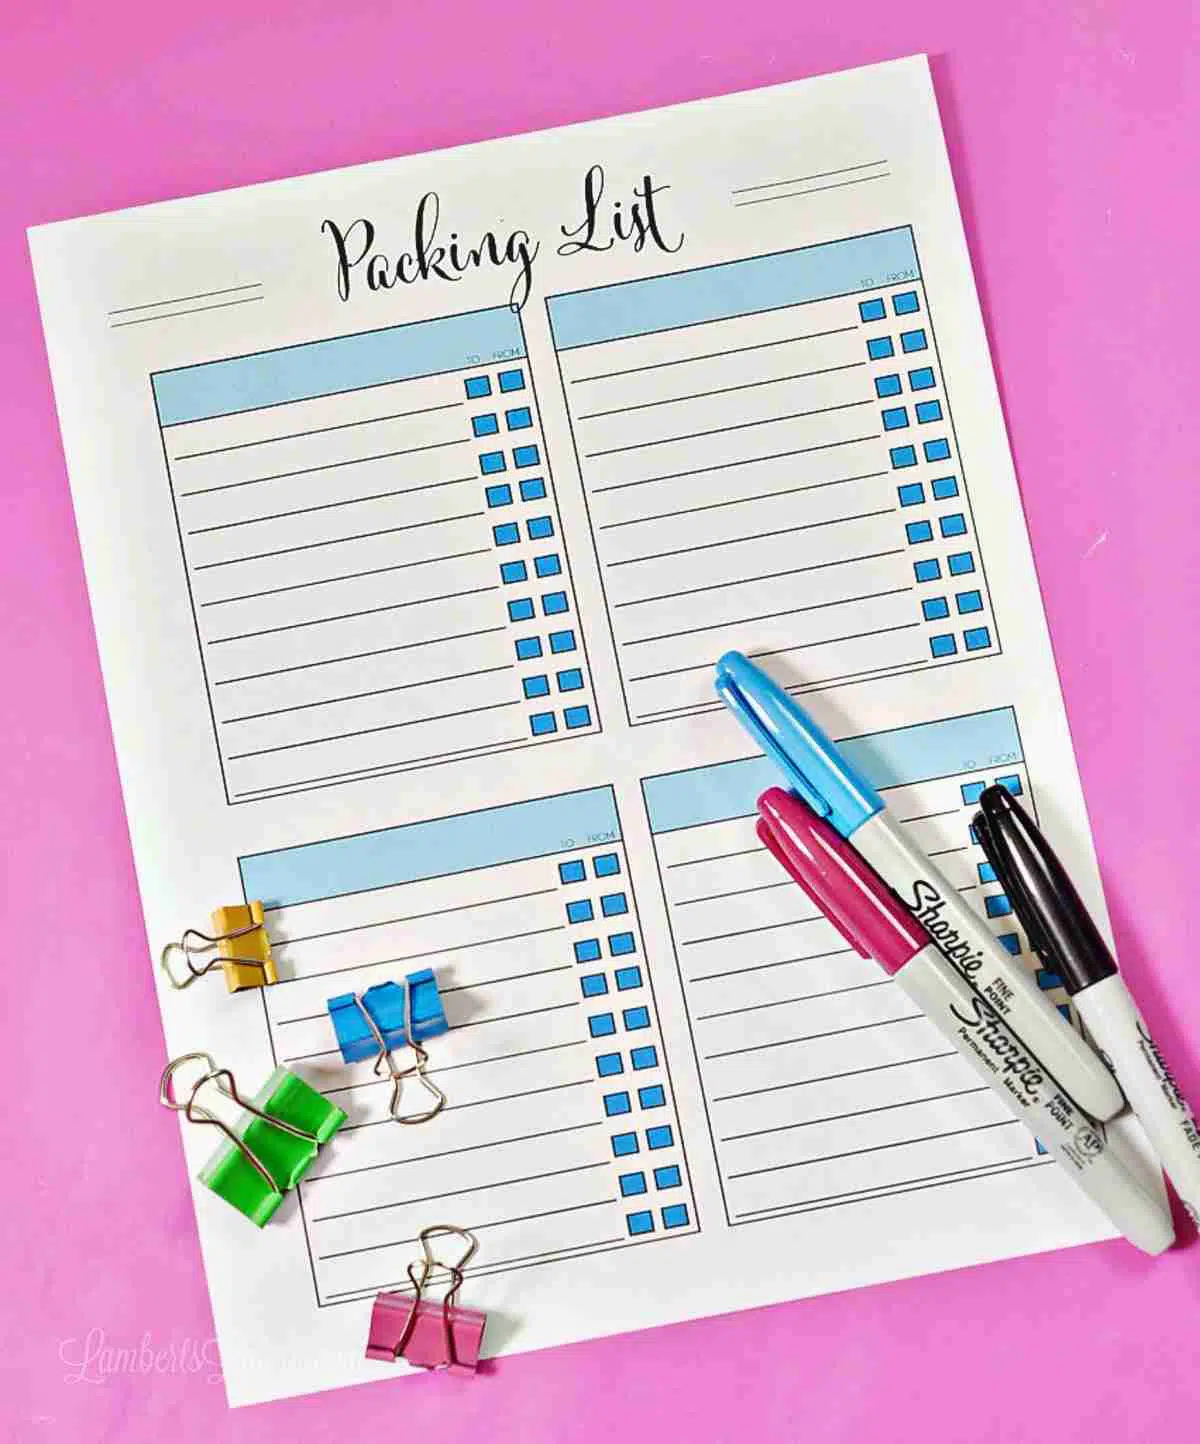 free printable vacation packing list.